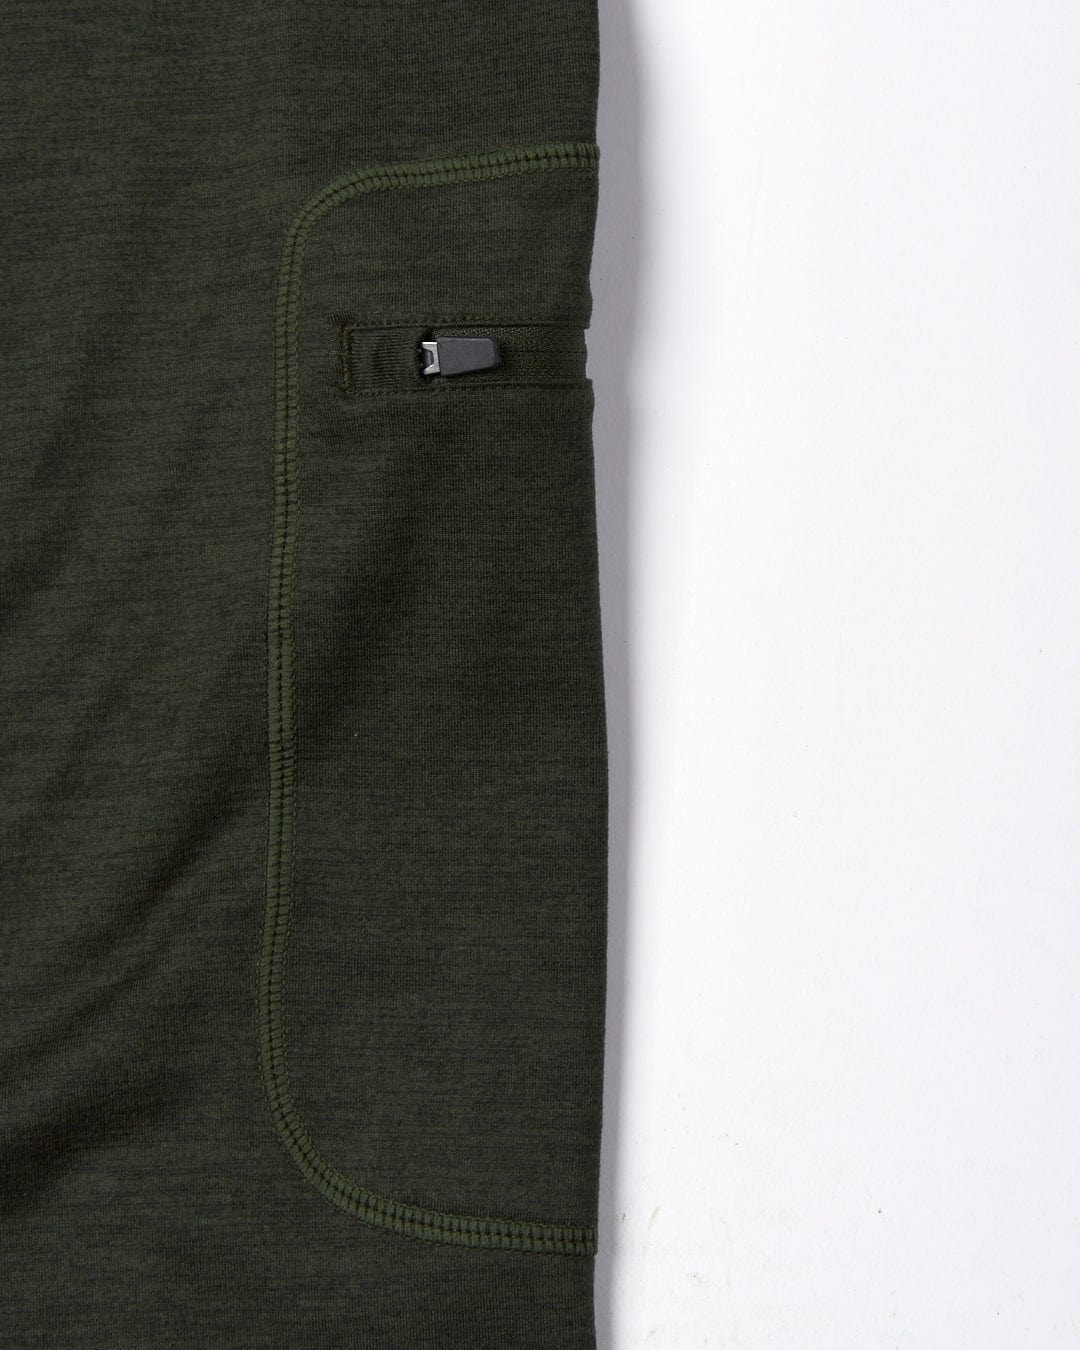 Close-up view of a Saltrock Trek - Womens Active Leggings - Dark Green with a detailed focus on a small, black zipper pocket on the side thigh.